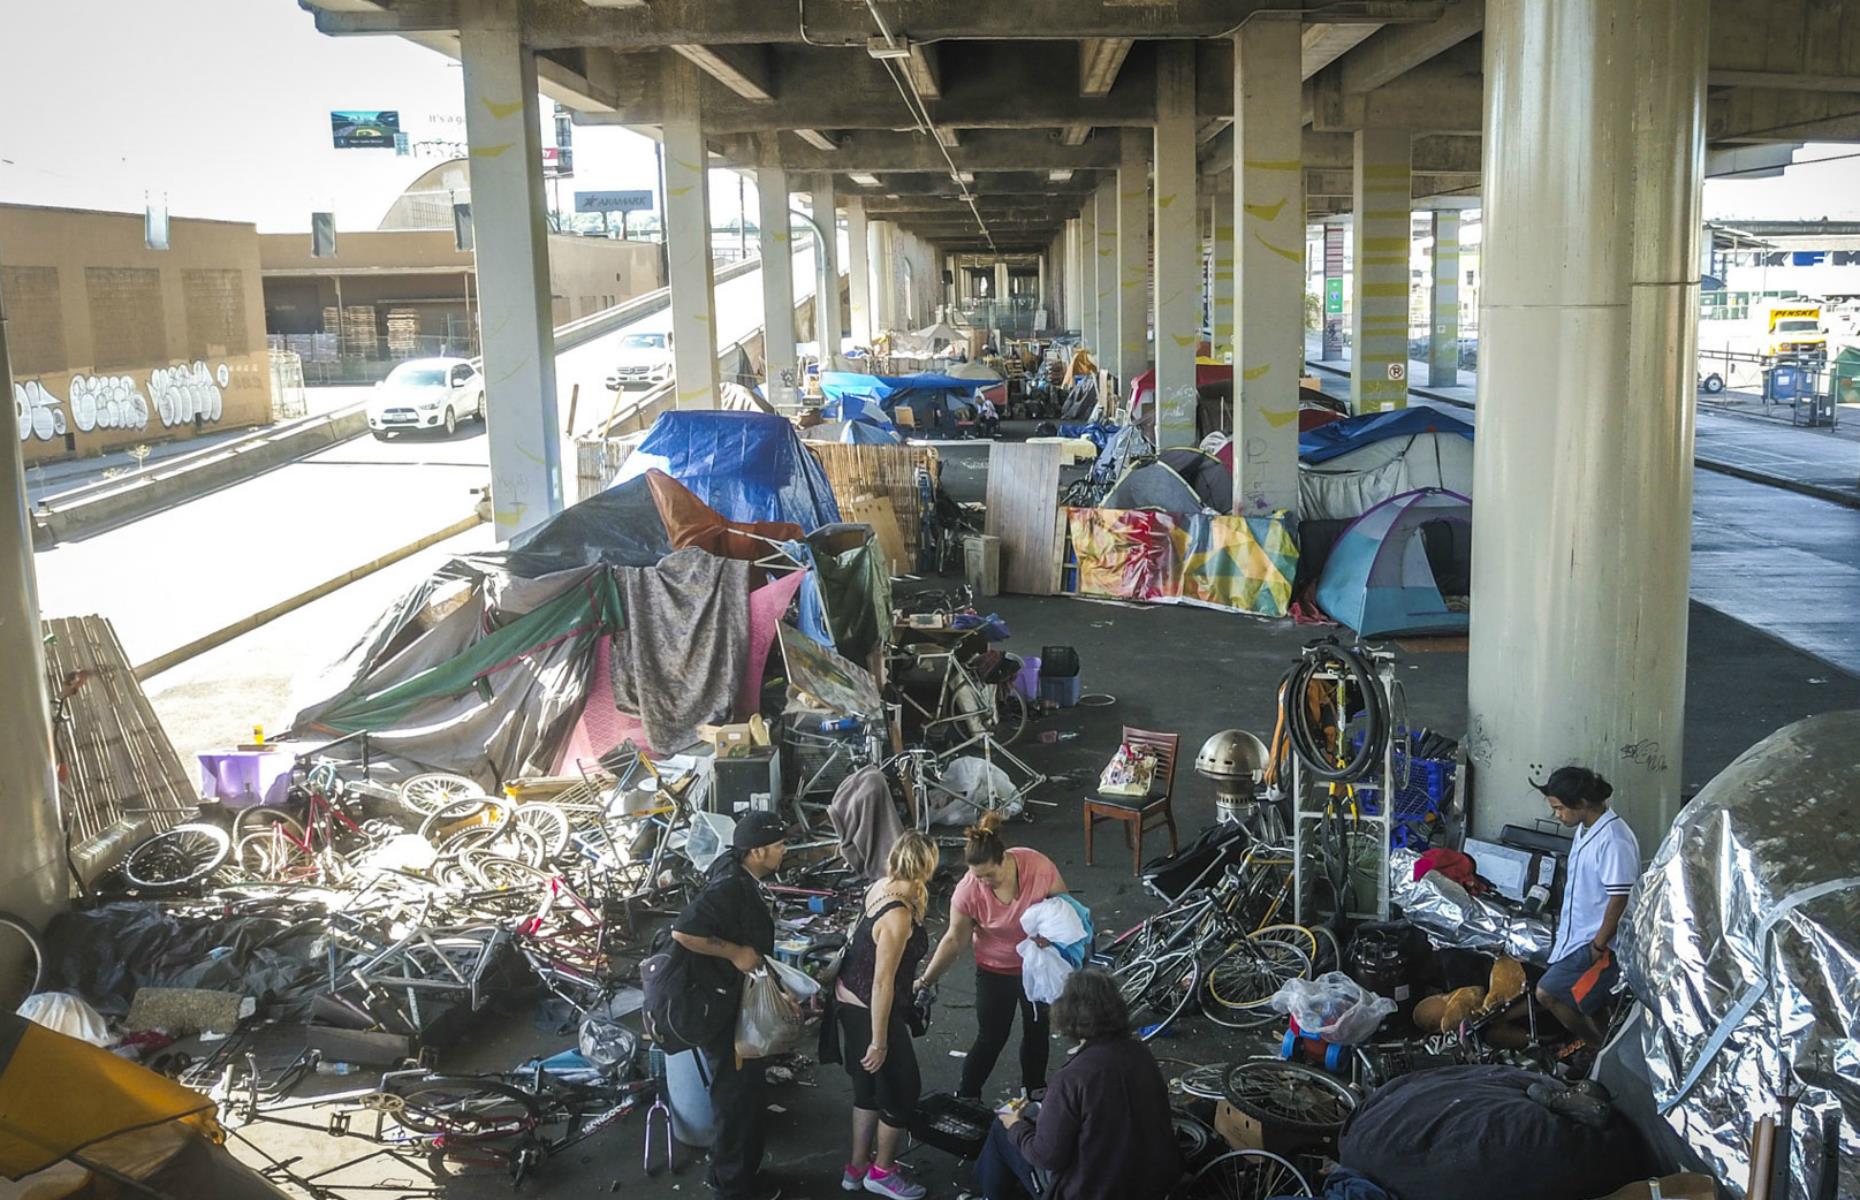 Often those living in tent cities have to move on when the government's lease on the space ends. This image was taken in the Alaskan Way Viaduct – a slightly more attractive site due to its roof protecting inhabitants from rain – days before it was slated to be closed. A sign threatened fines for not vacating.